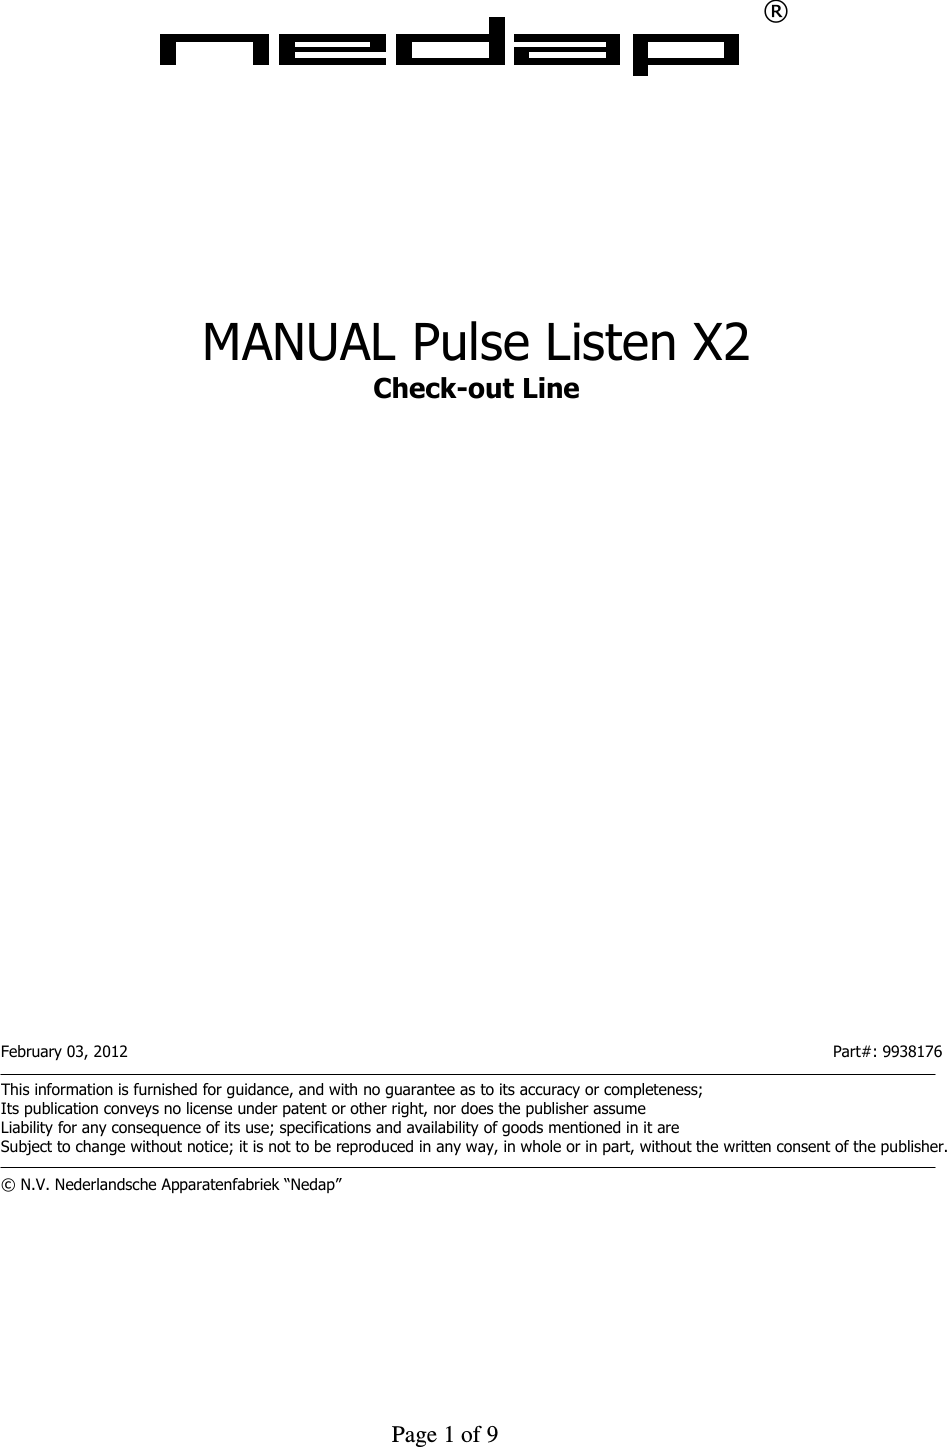     Page 1 of 9    ®             MANUAL Pulse Listen X2 Check-out Line                            February 03, 2012                      Part#: 9938176  This information is furnished for guidance, and with no guarantee as to its accuracy or completeness; Its publication conveys no license under patent or other right, nor does the publisher assume Liability for any consequence of its use; specifications and availability of goods mentioned in it are Subject to change without notice; it is not to be reproduced in any way, in whole or in part, without the written consent of the publisher.  © N.V. Nederlandsche Apparatenfabriek “Nedap”